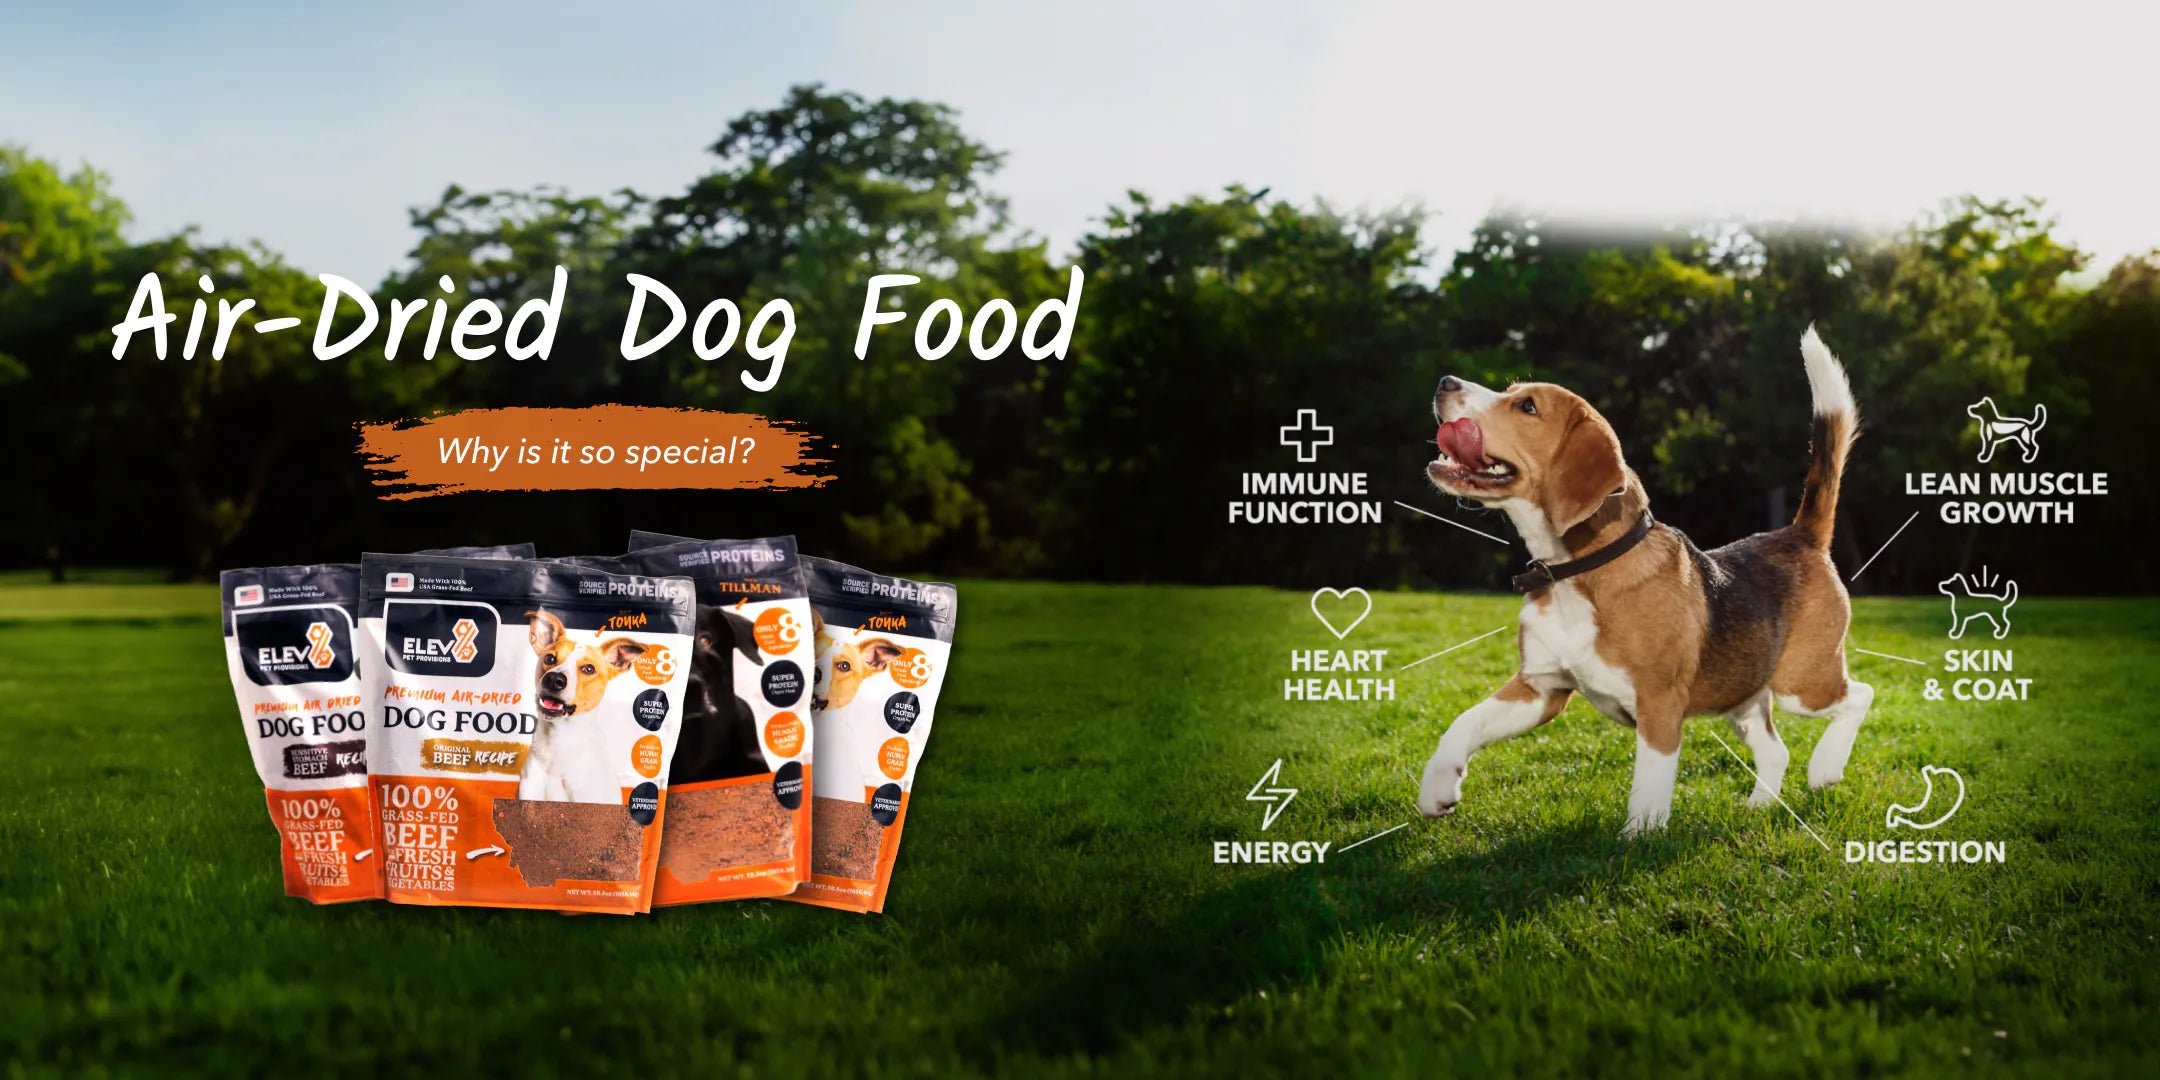 Air-Dried Dog Food - Why is it so special? - Immune Function - Heart Health - Energy - Lean Muscle Growth - Skin & Coat - Digestion